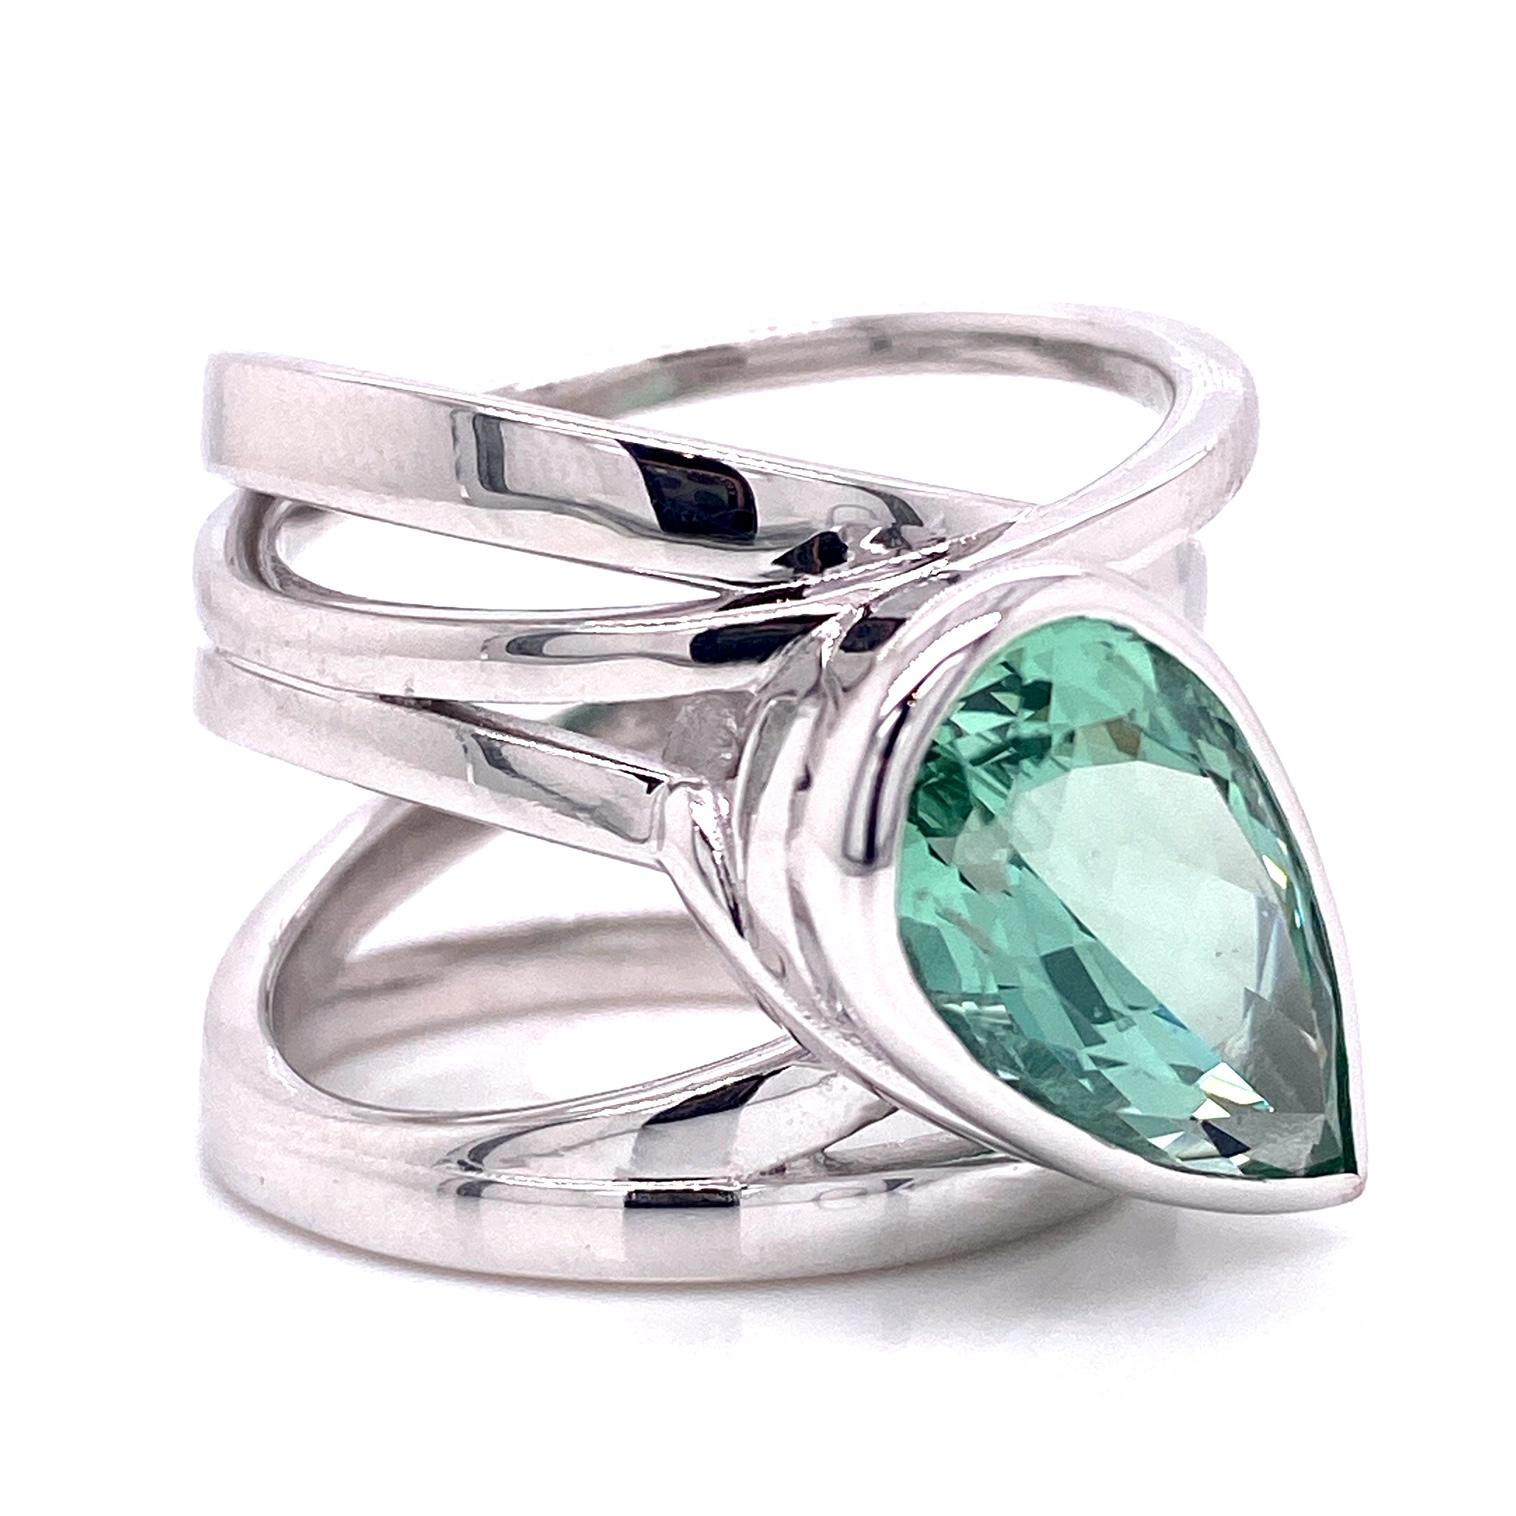 An 18k white gold wrap style ring bezel set with one 4.88 carat pear shaped green beryl. This ring was made and designed by llyn strong.